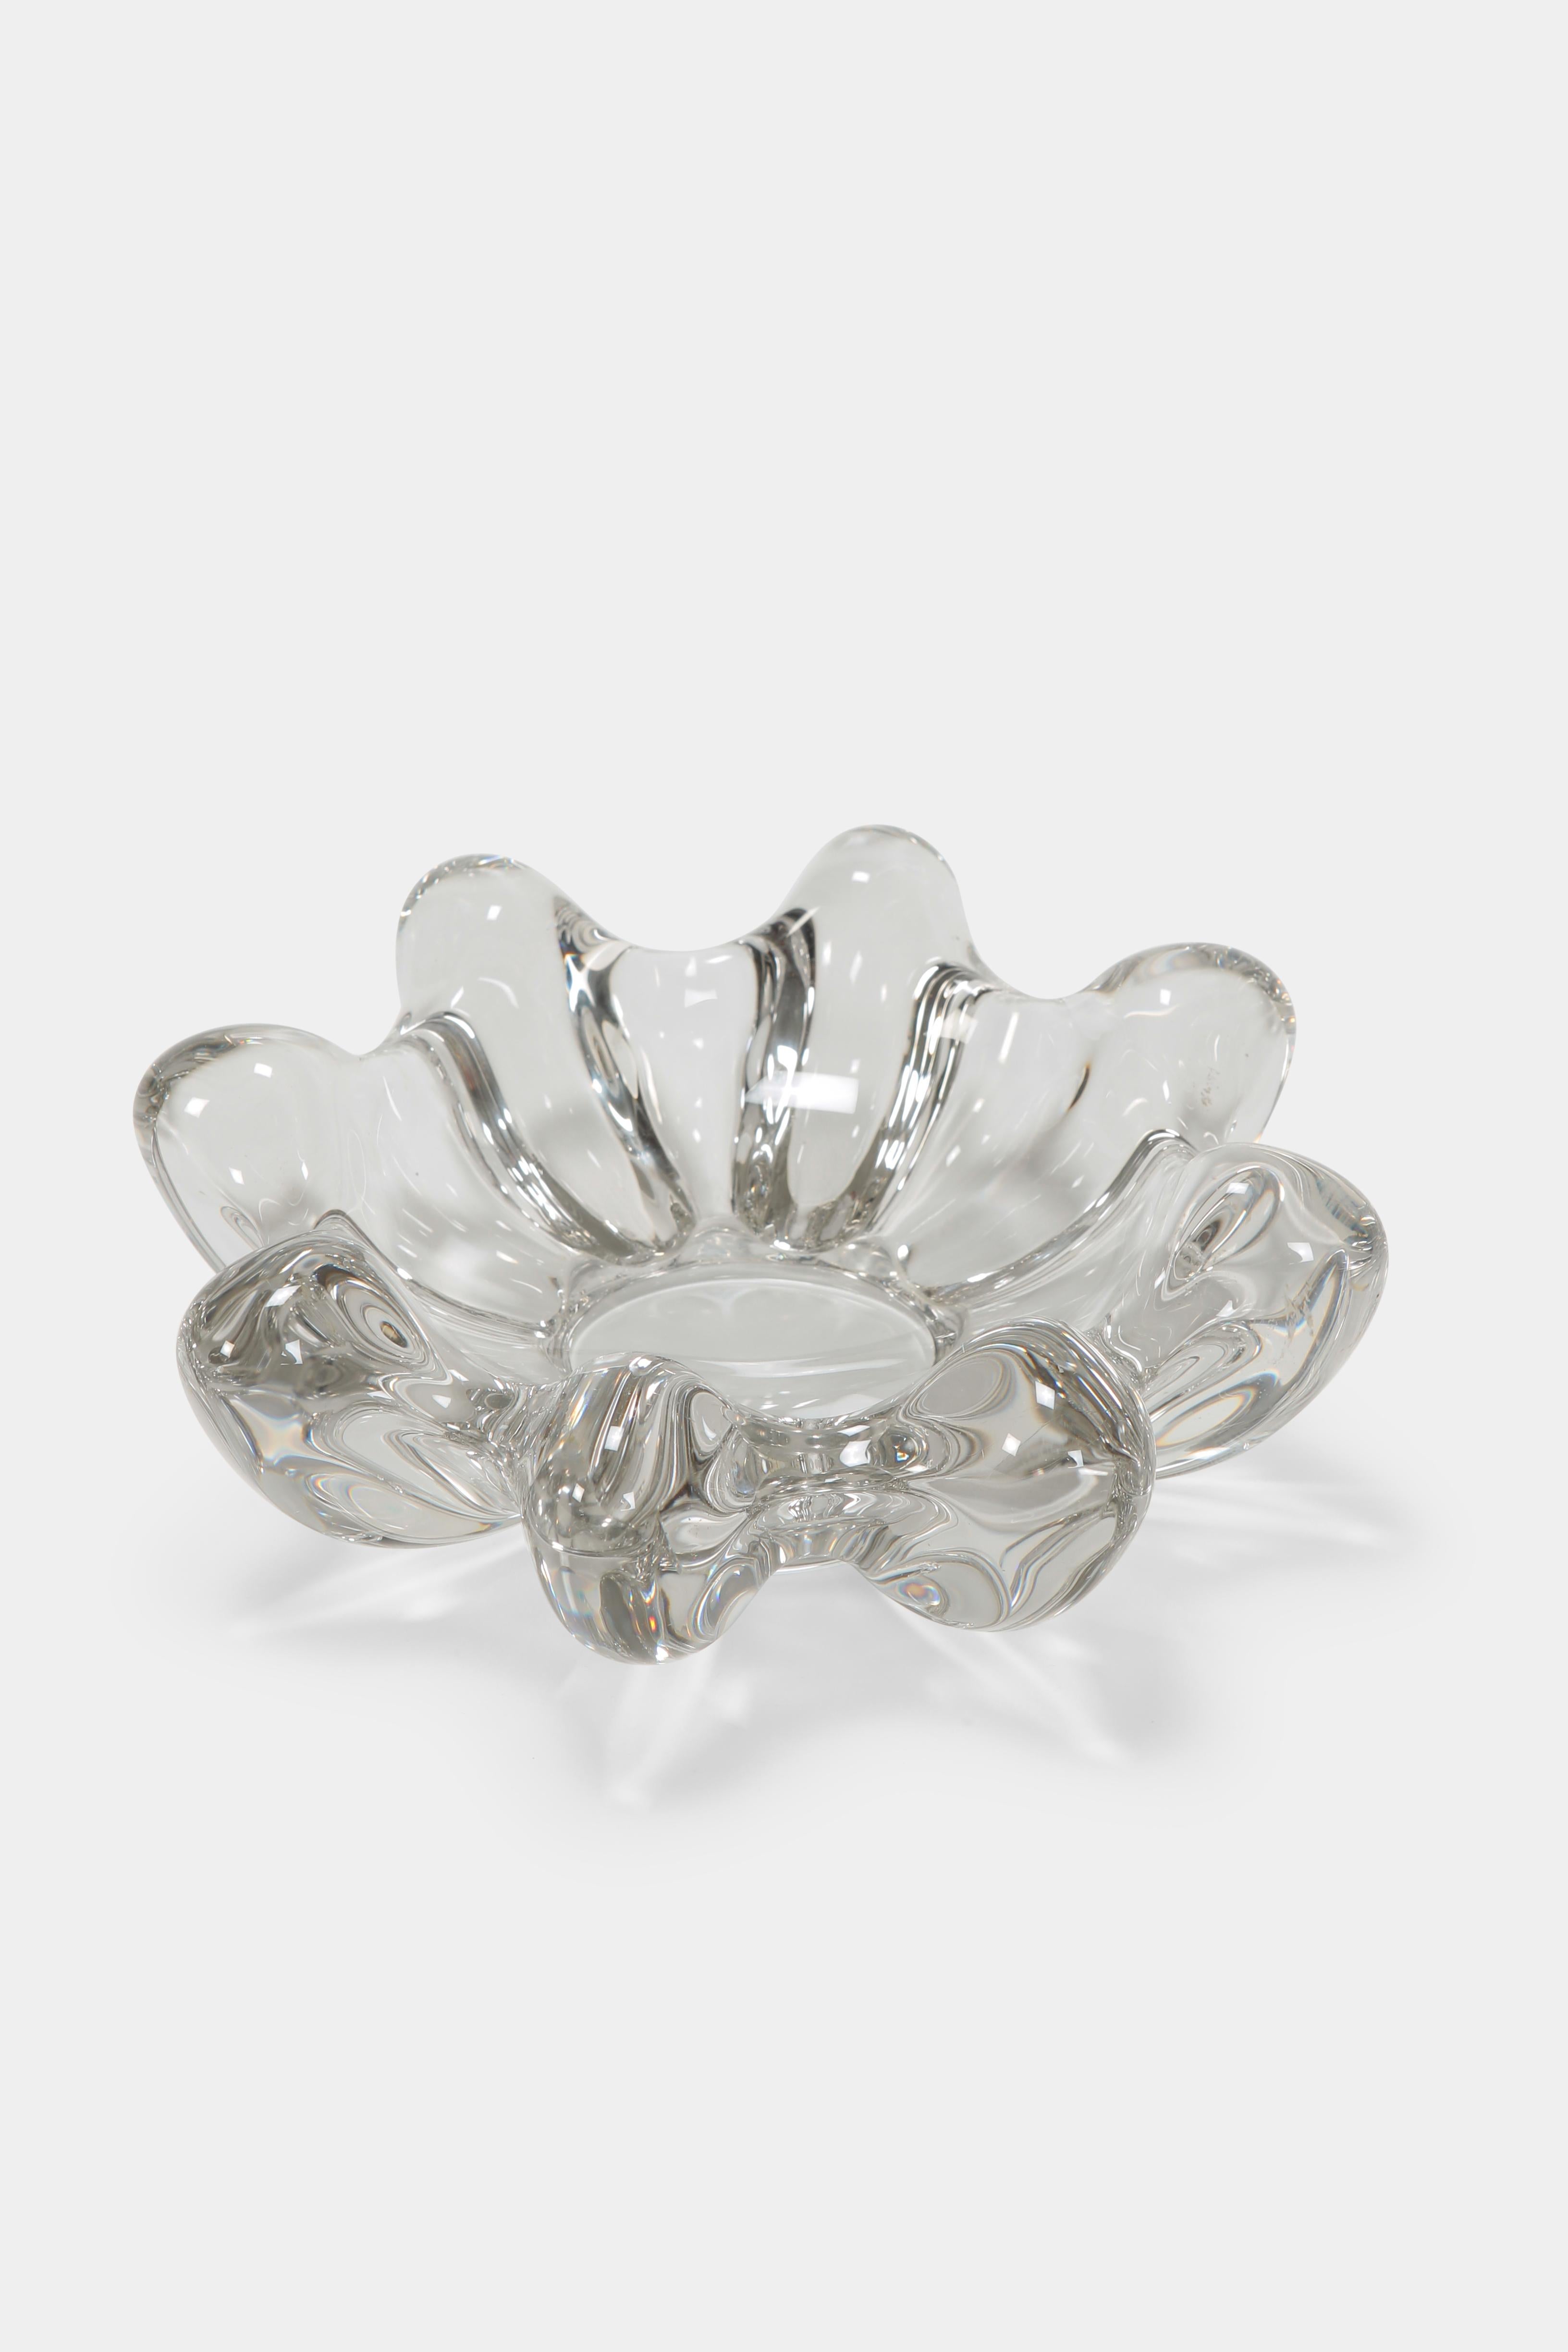 Lovely Per B. Sundberg bowl manufactured by Orrefors in the 1990s in Sweden. Made of clear crystal glass.